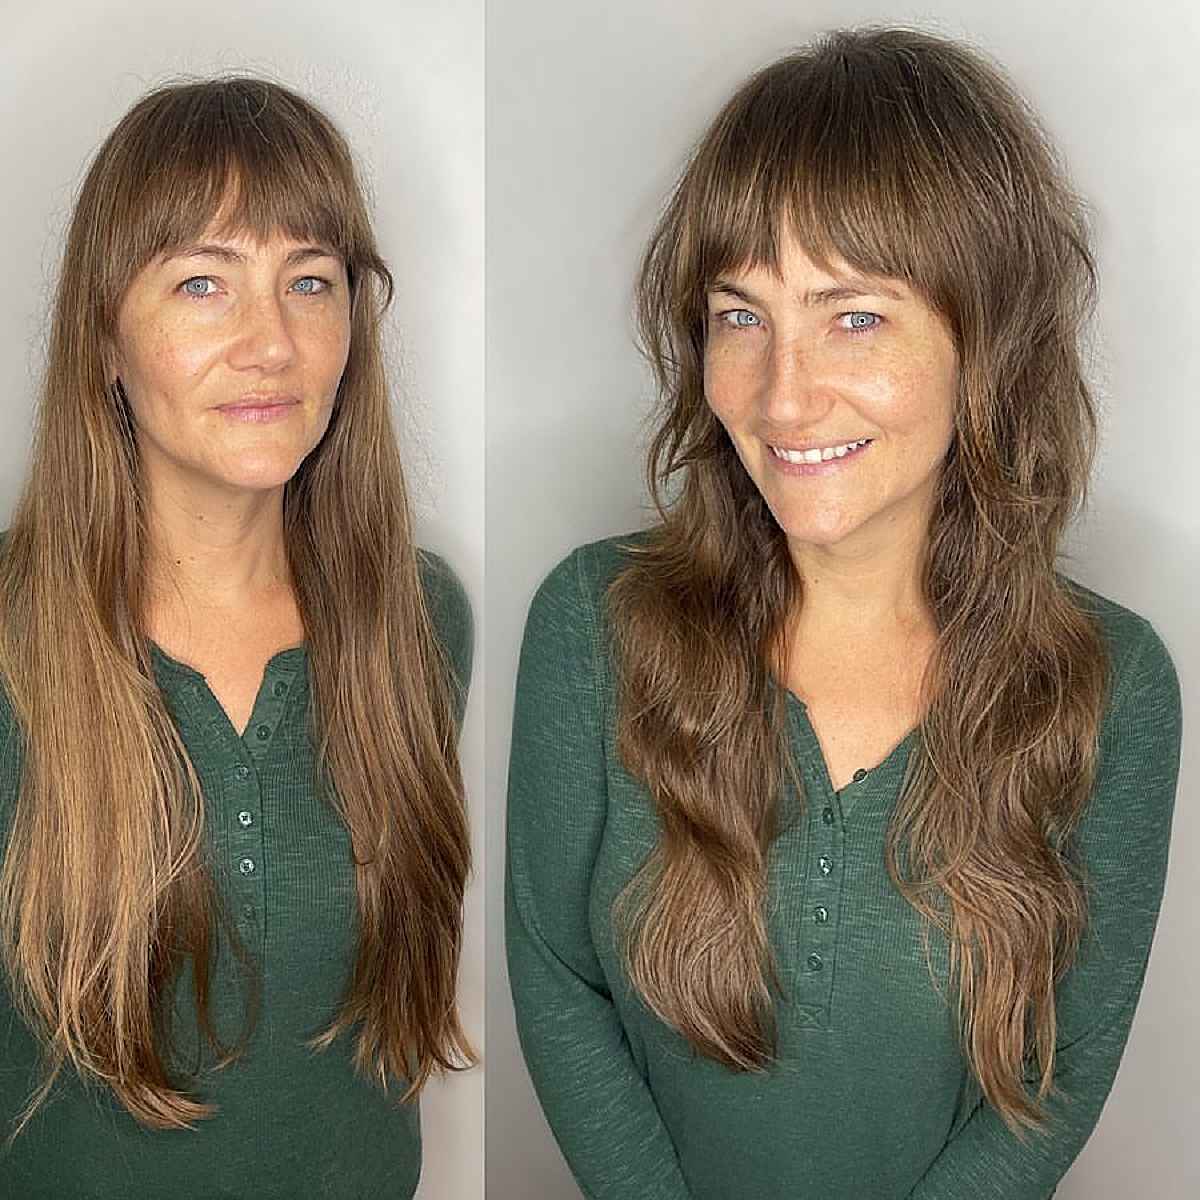 Bangs for women over 40 with square faces